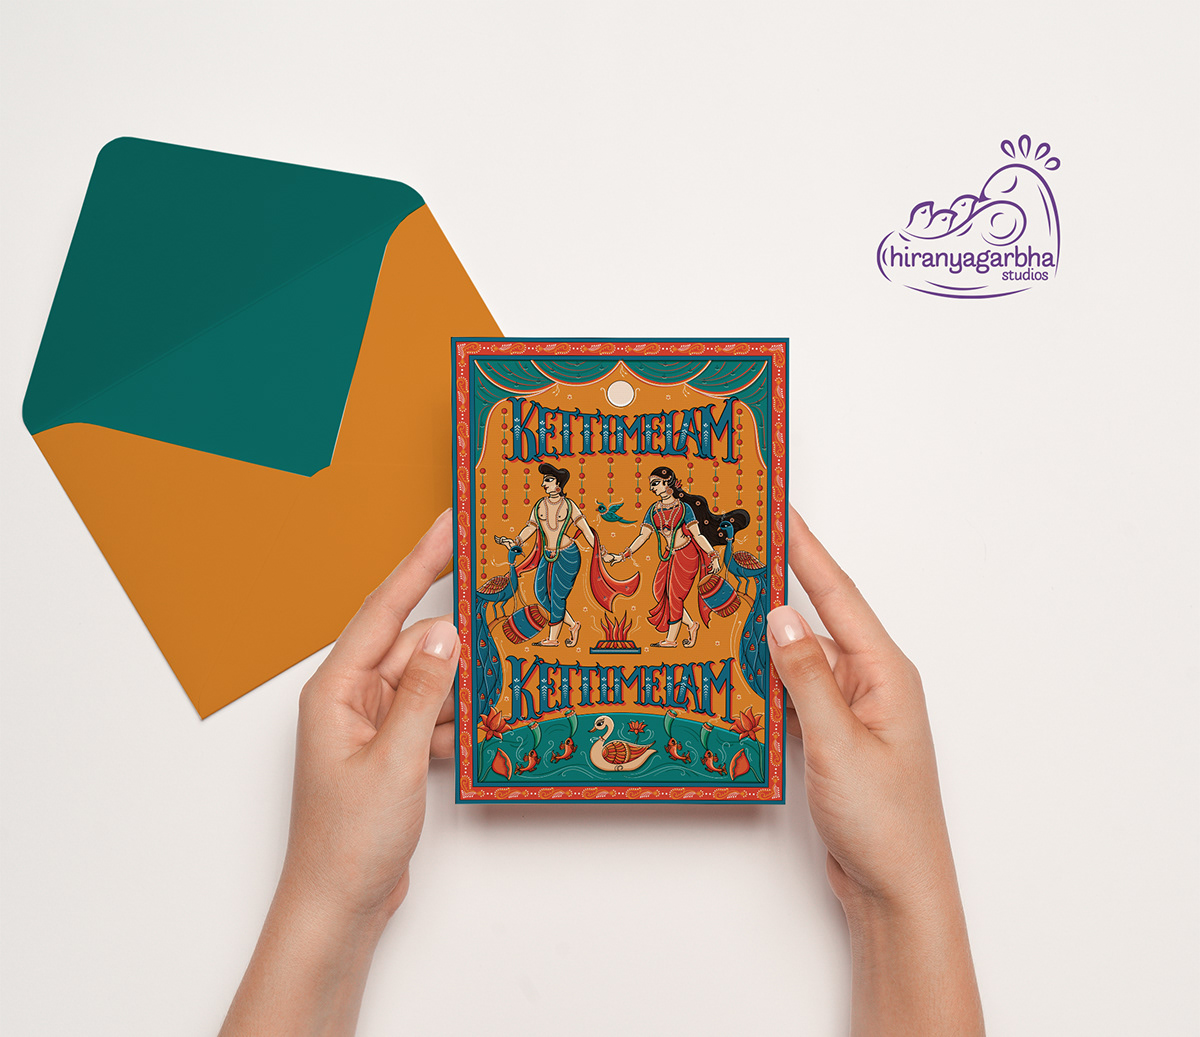 Kettimelam Tamil Wedding Invite Front Side Card View along with the envelope